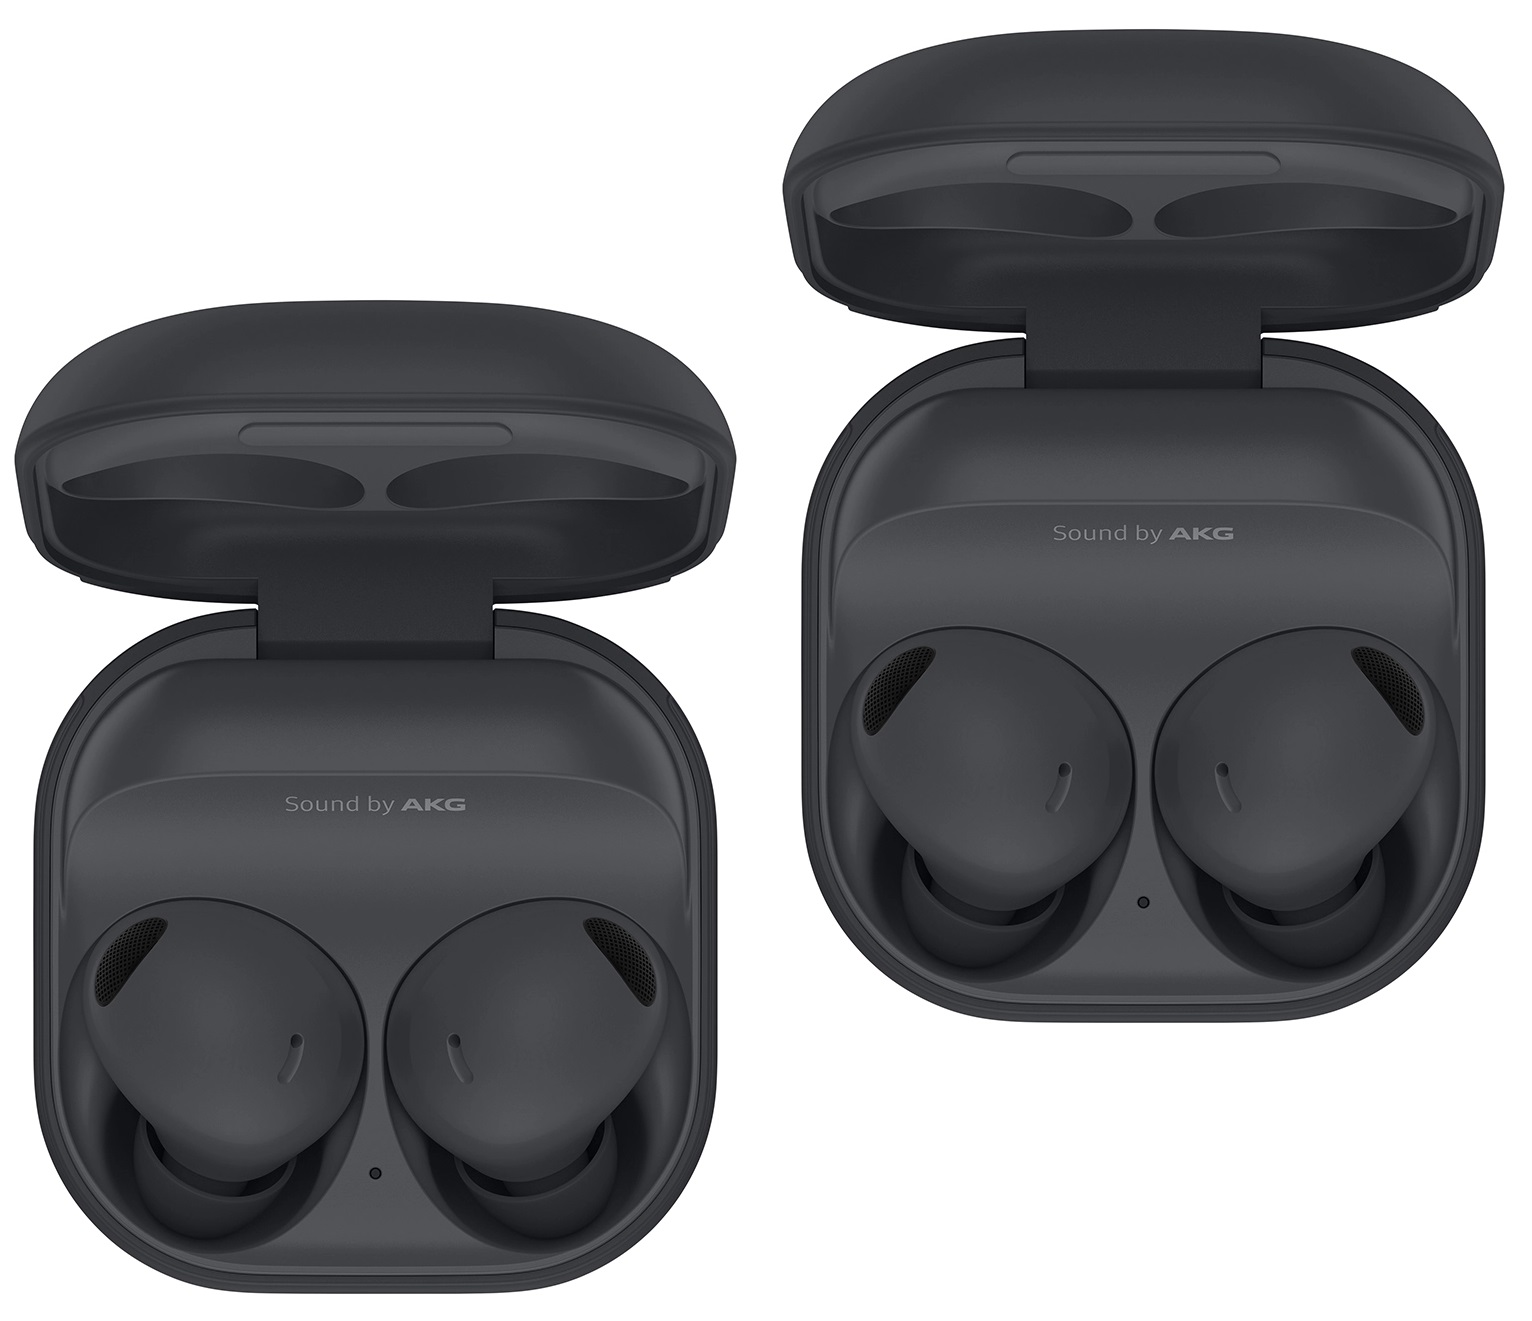 Samsung Galaxy Buds2 Pro True Wireless Bluetooth Earbuds (Graphite, Open Box) 2 for $119 + Free Shipping